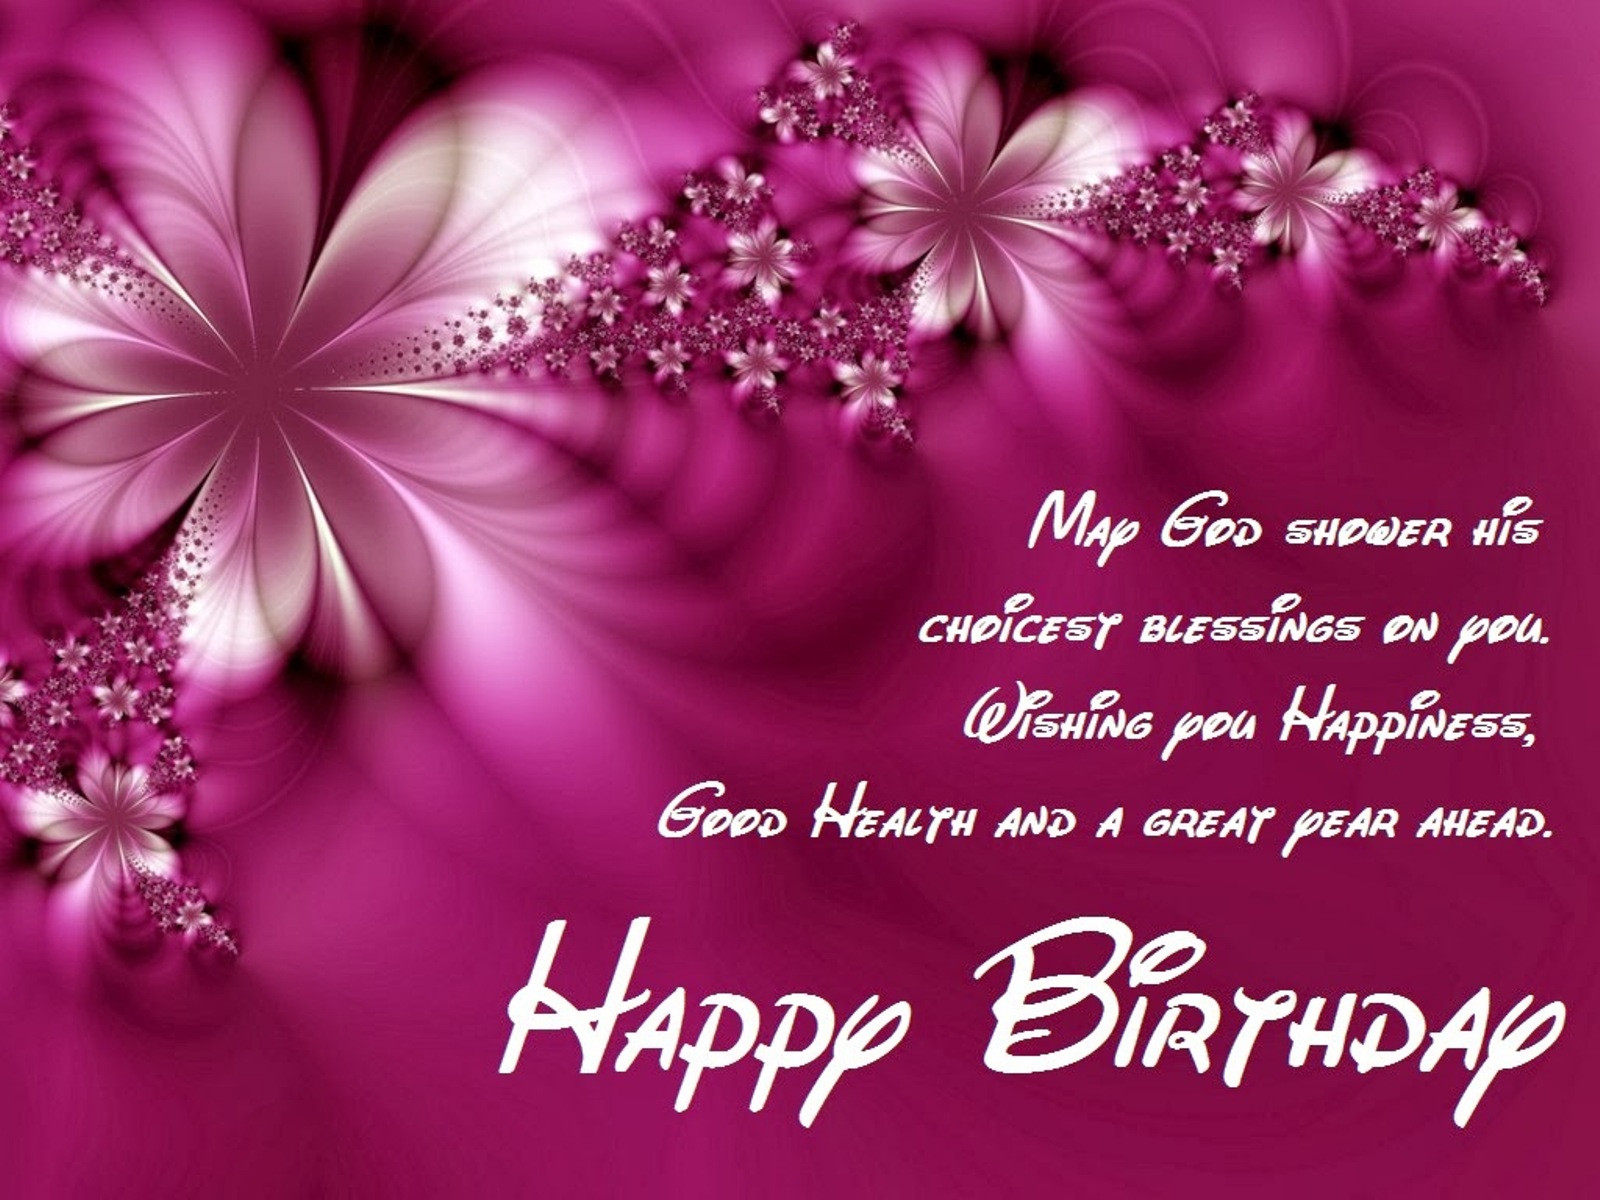 Beautiful Birthday Quotes
 The 50 Best Happy Birthday Quotes of All Time